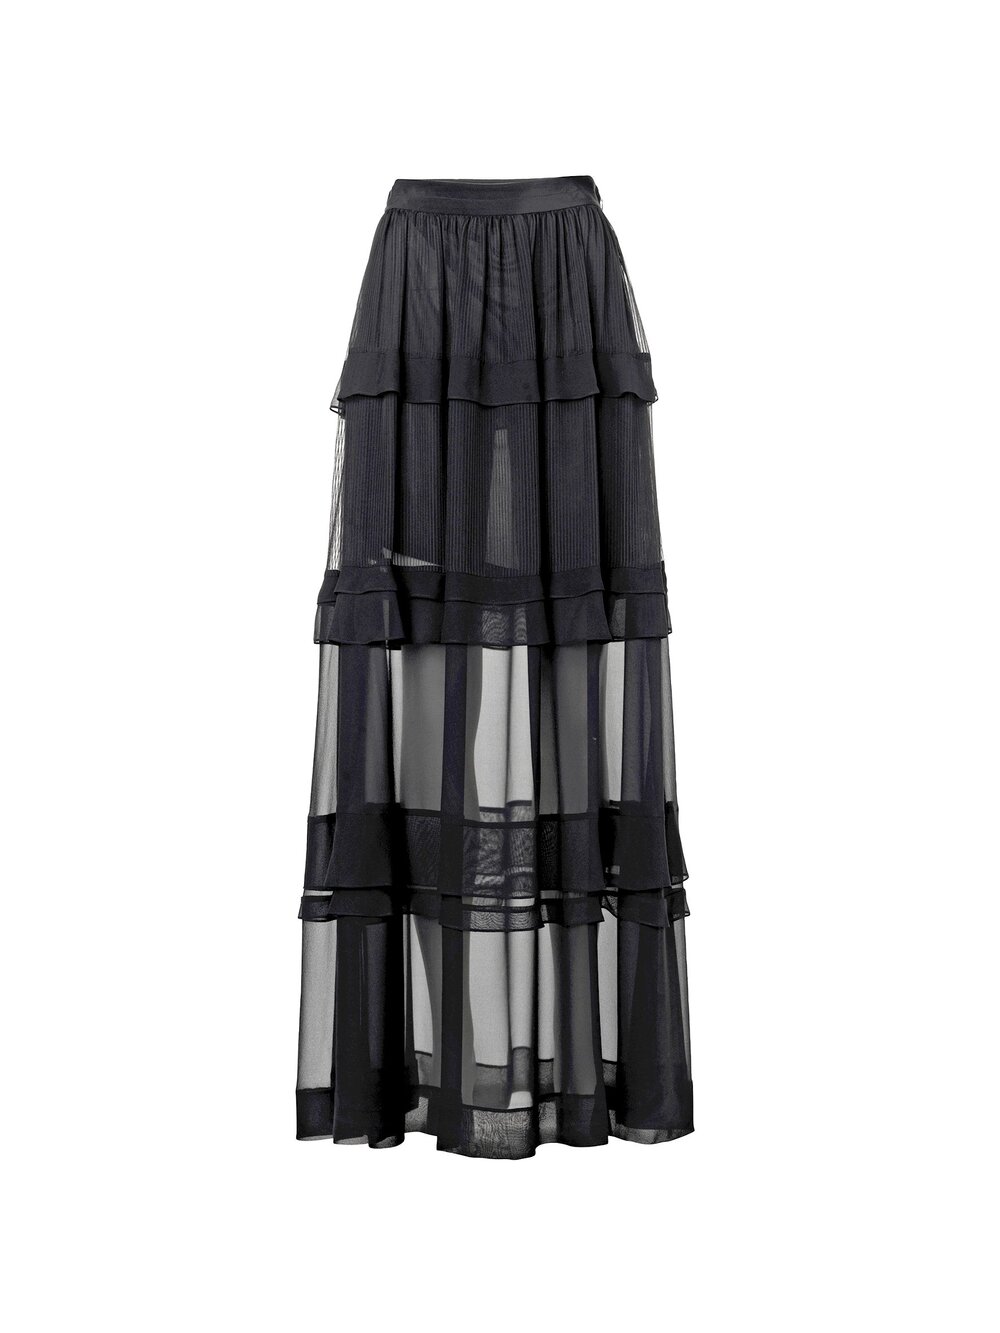 By Malene Birger Alessal Maxi Skirt in Black UFO No More